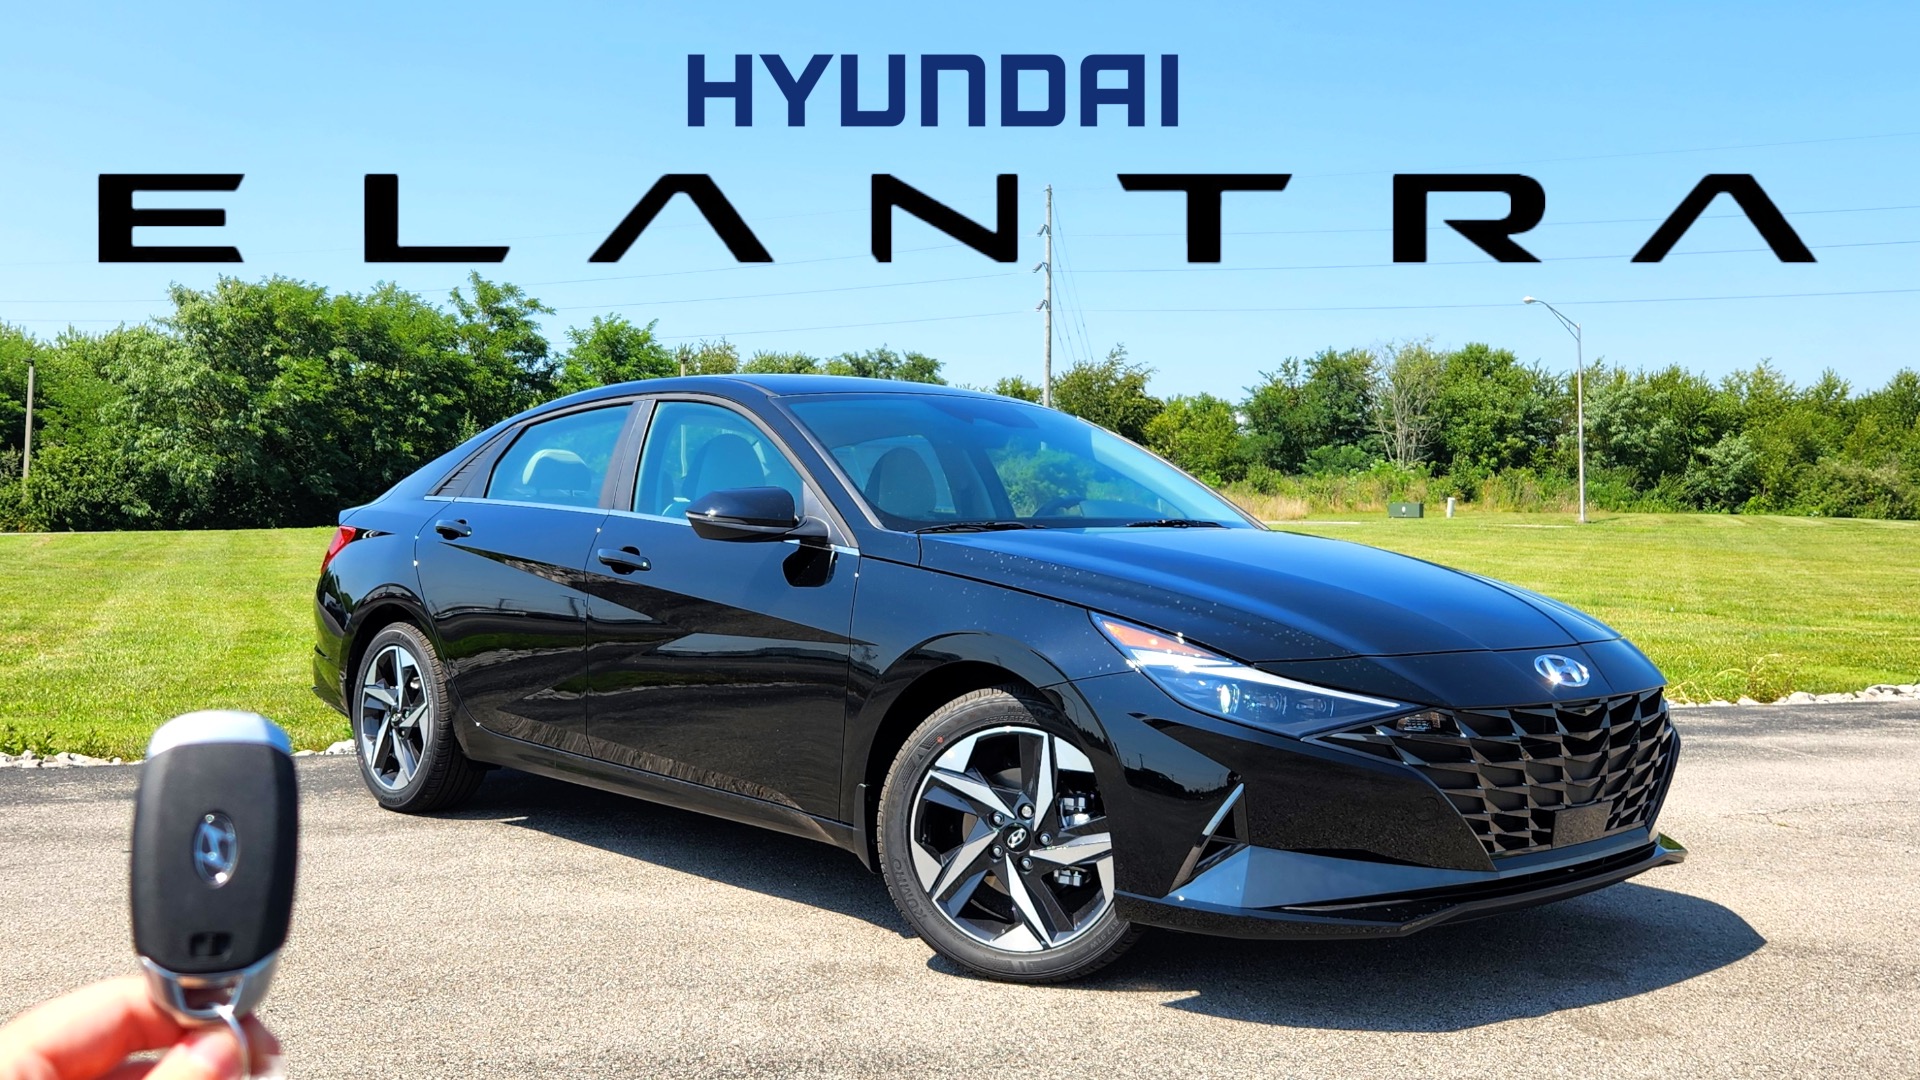 2023 Hyundai Elantra: Whats New for 2023, Exterior, Interior and Driving  Impressions - Car Confections 2023 Hyundai Elantra: Whats New for 2023,  Exterior, Interior and Driving Impressions 2023 Hyundai Elantra: Whats New  for 2023 and Review